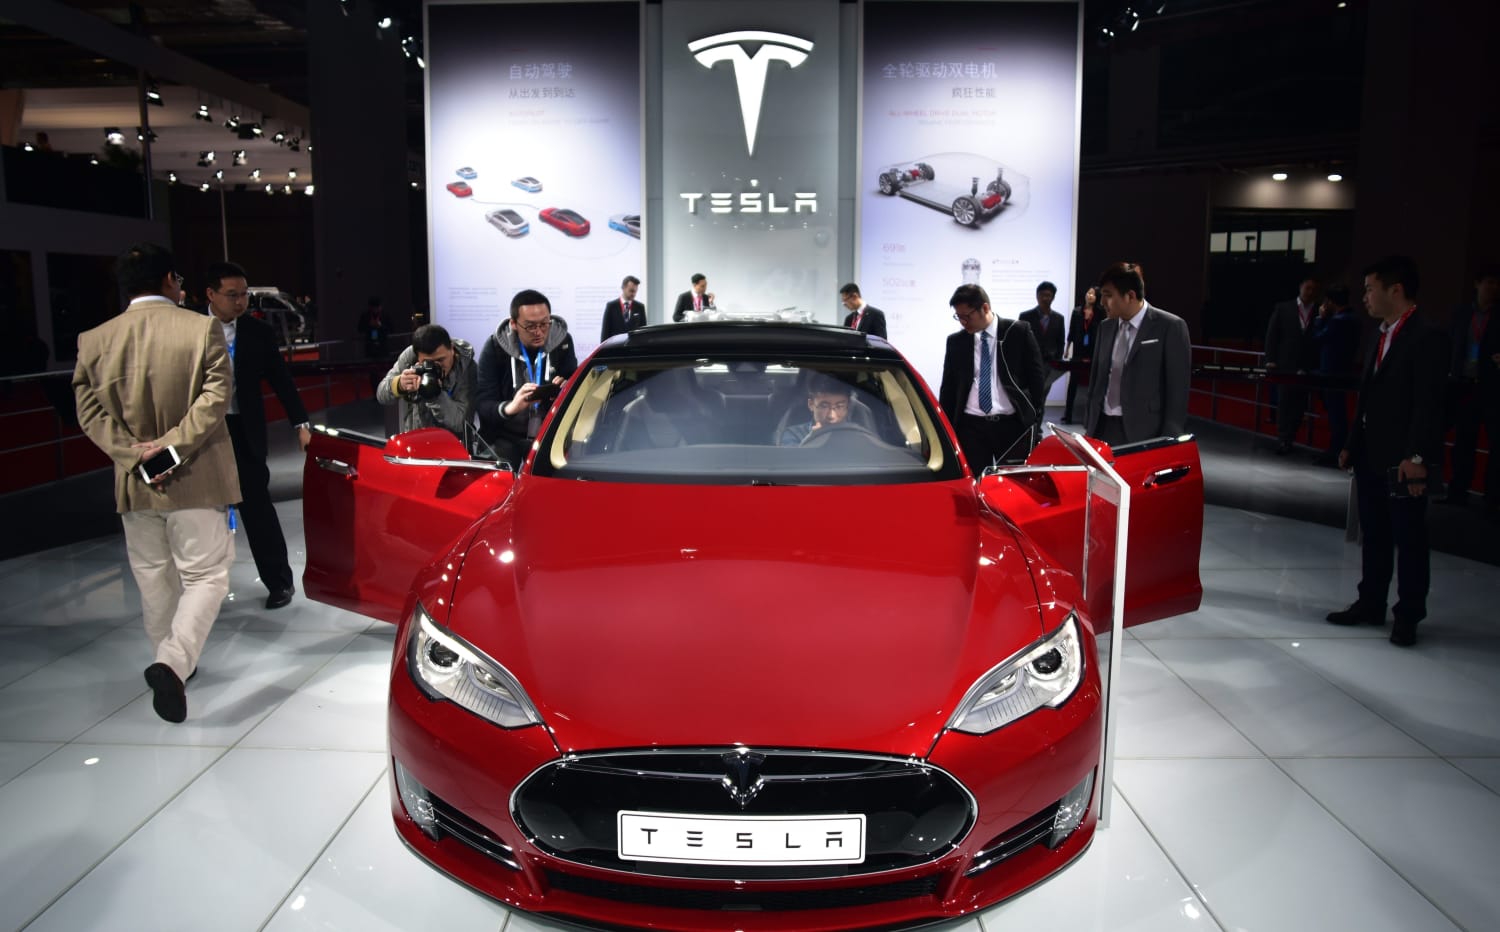 Tesla Cuts Prices On Popular Electric Cars: Here’s What’s On Sale and What’s Not